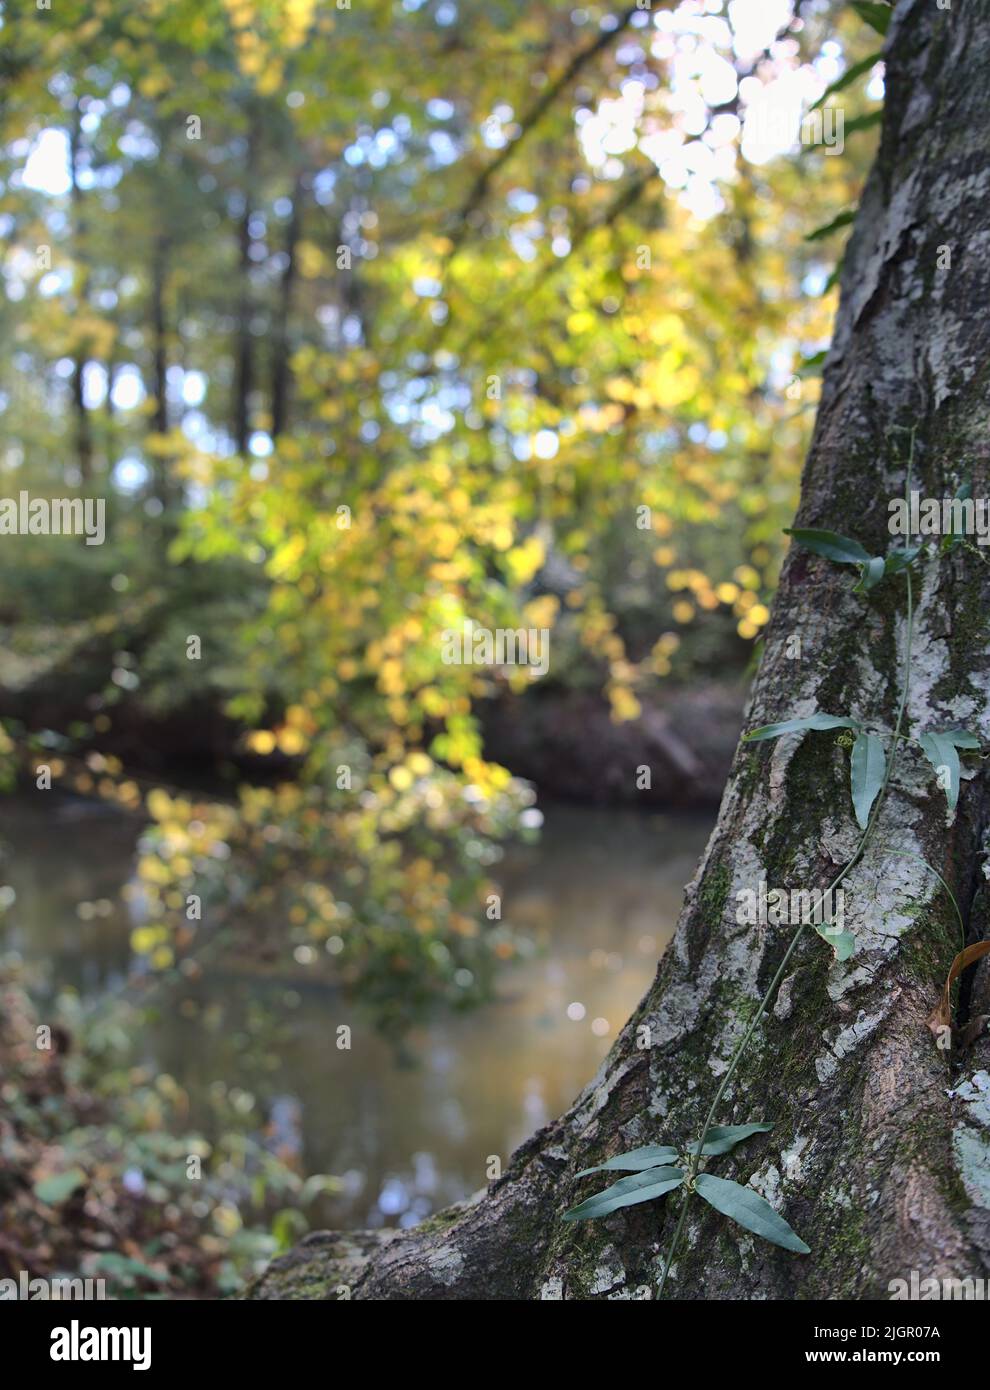 A macro image of ivy growing on a mossy tree turnk with fall, colorful leaves in the background. Stock Photo